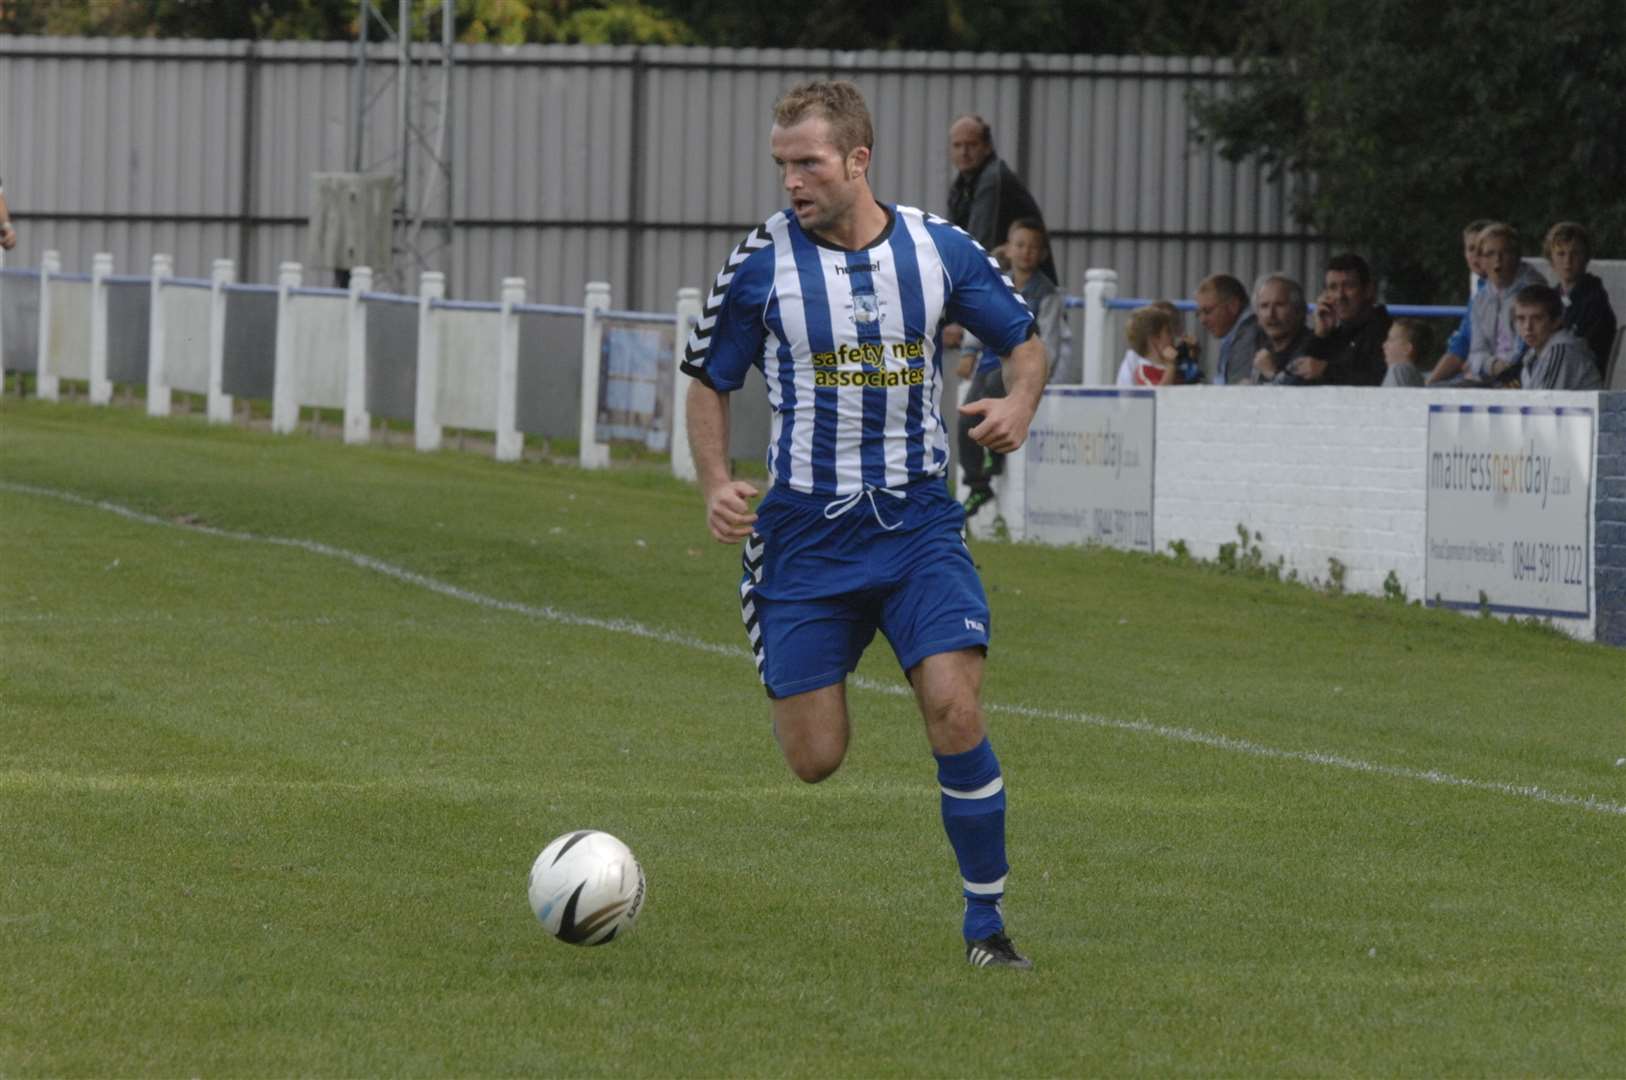 Darren Marsden turned on the style to help Herne Bay get off to a good start Picture: Chris Davey